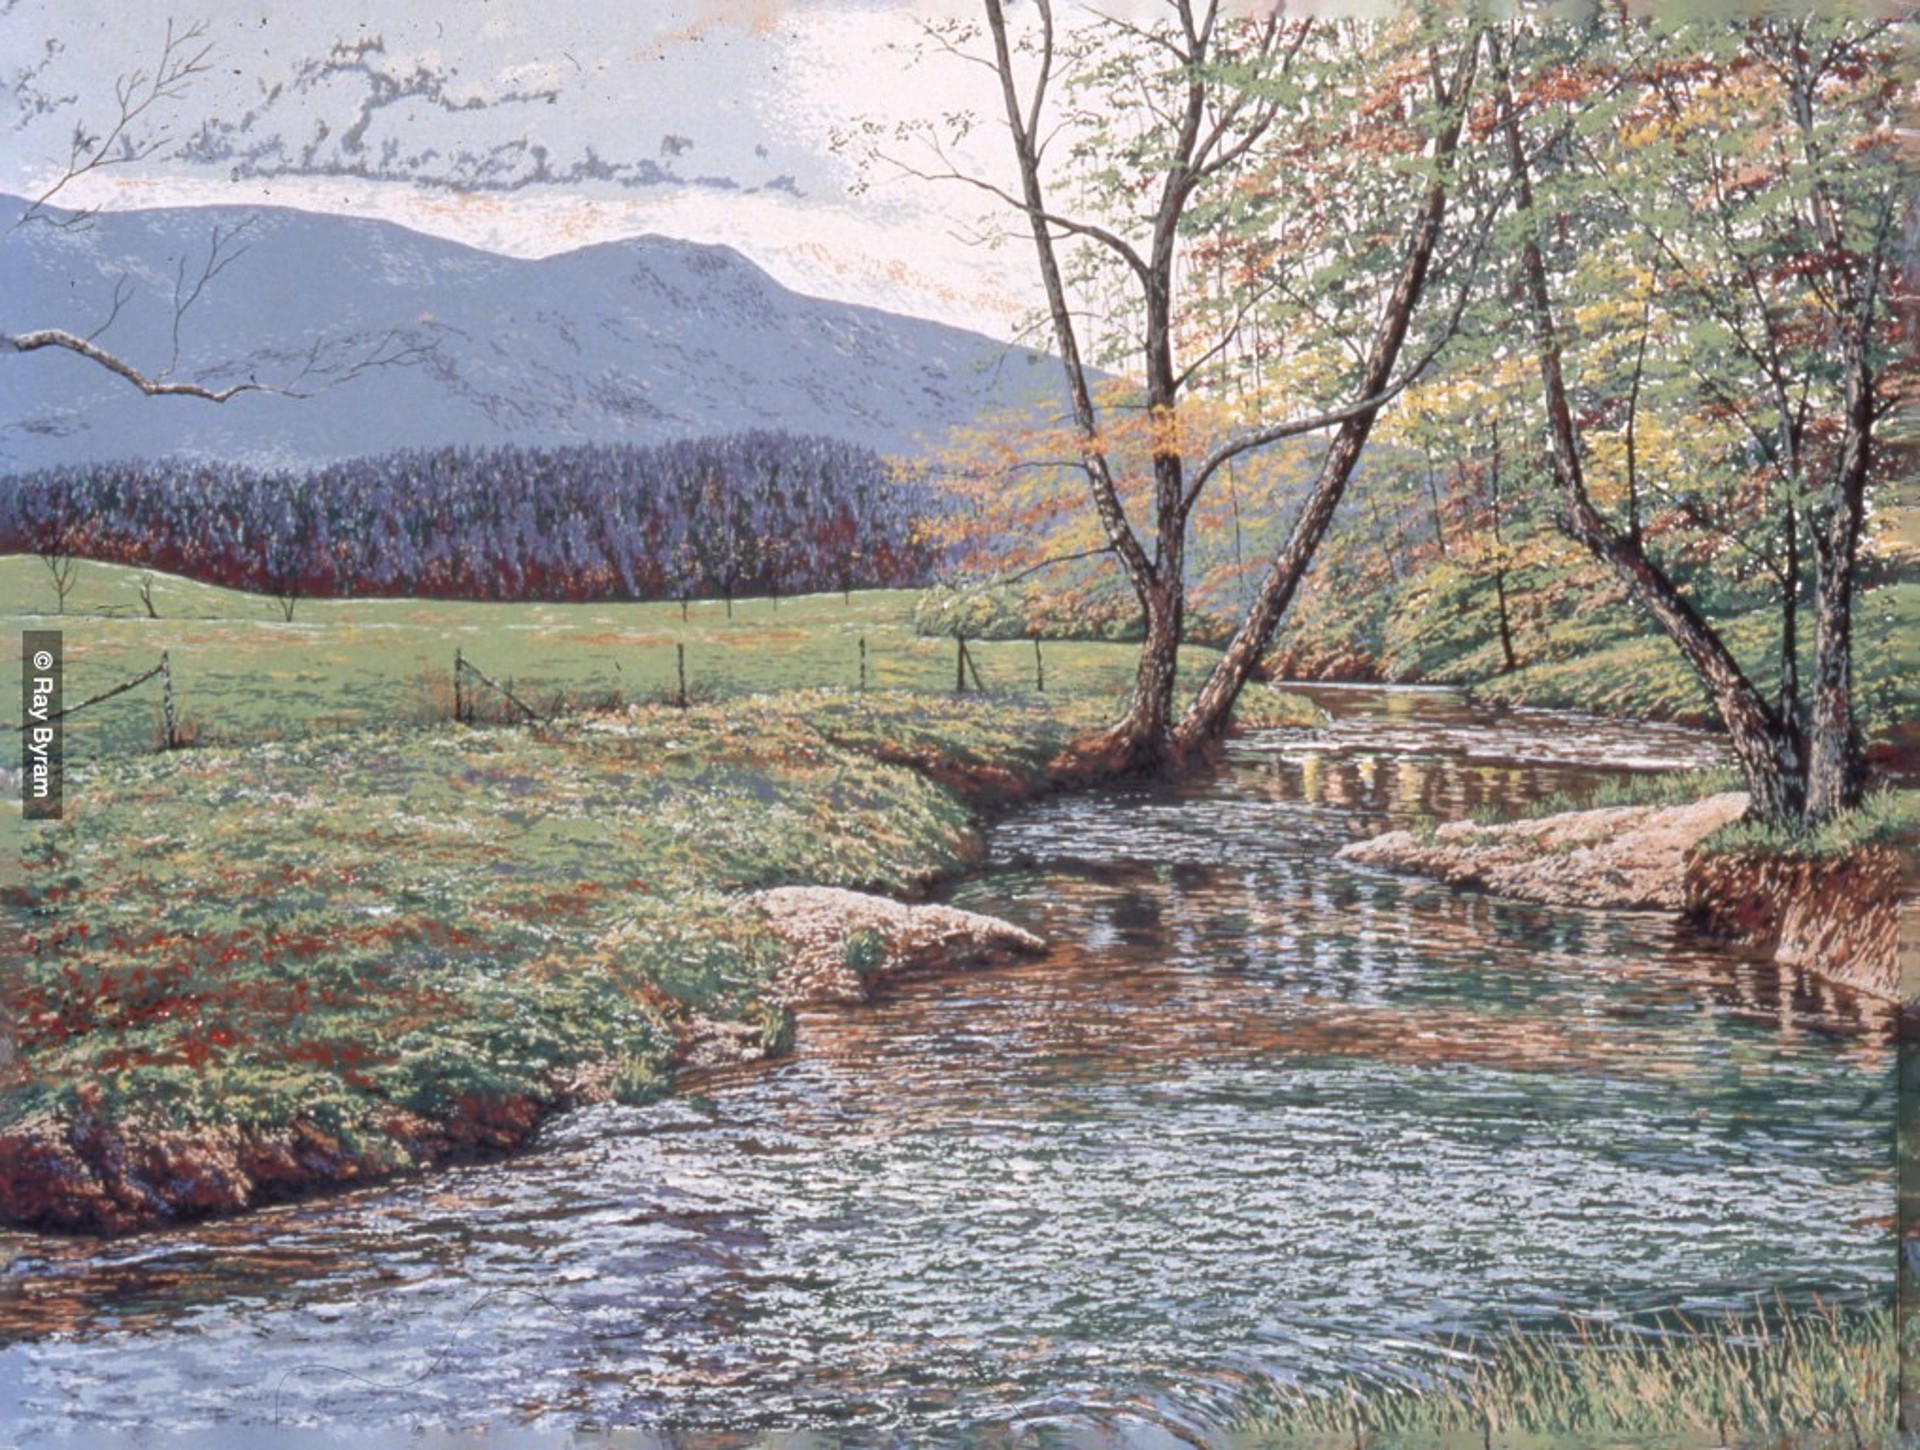 The Valley in Spring by Ray Byram